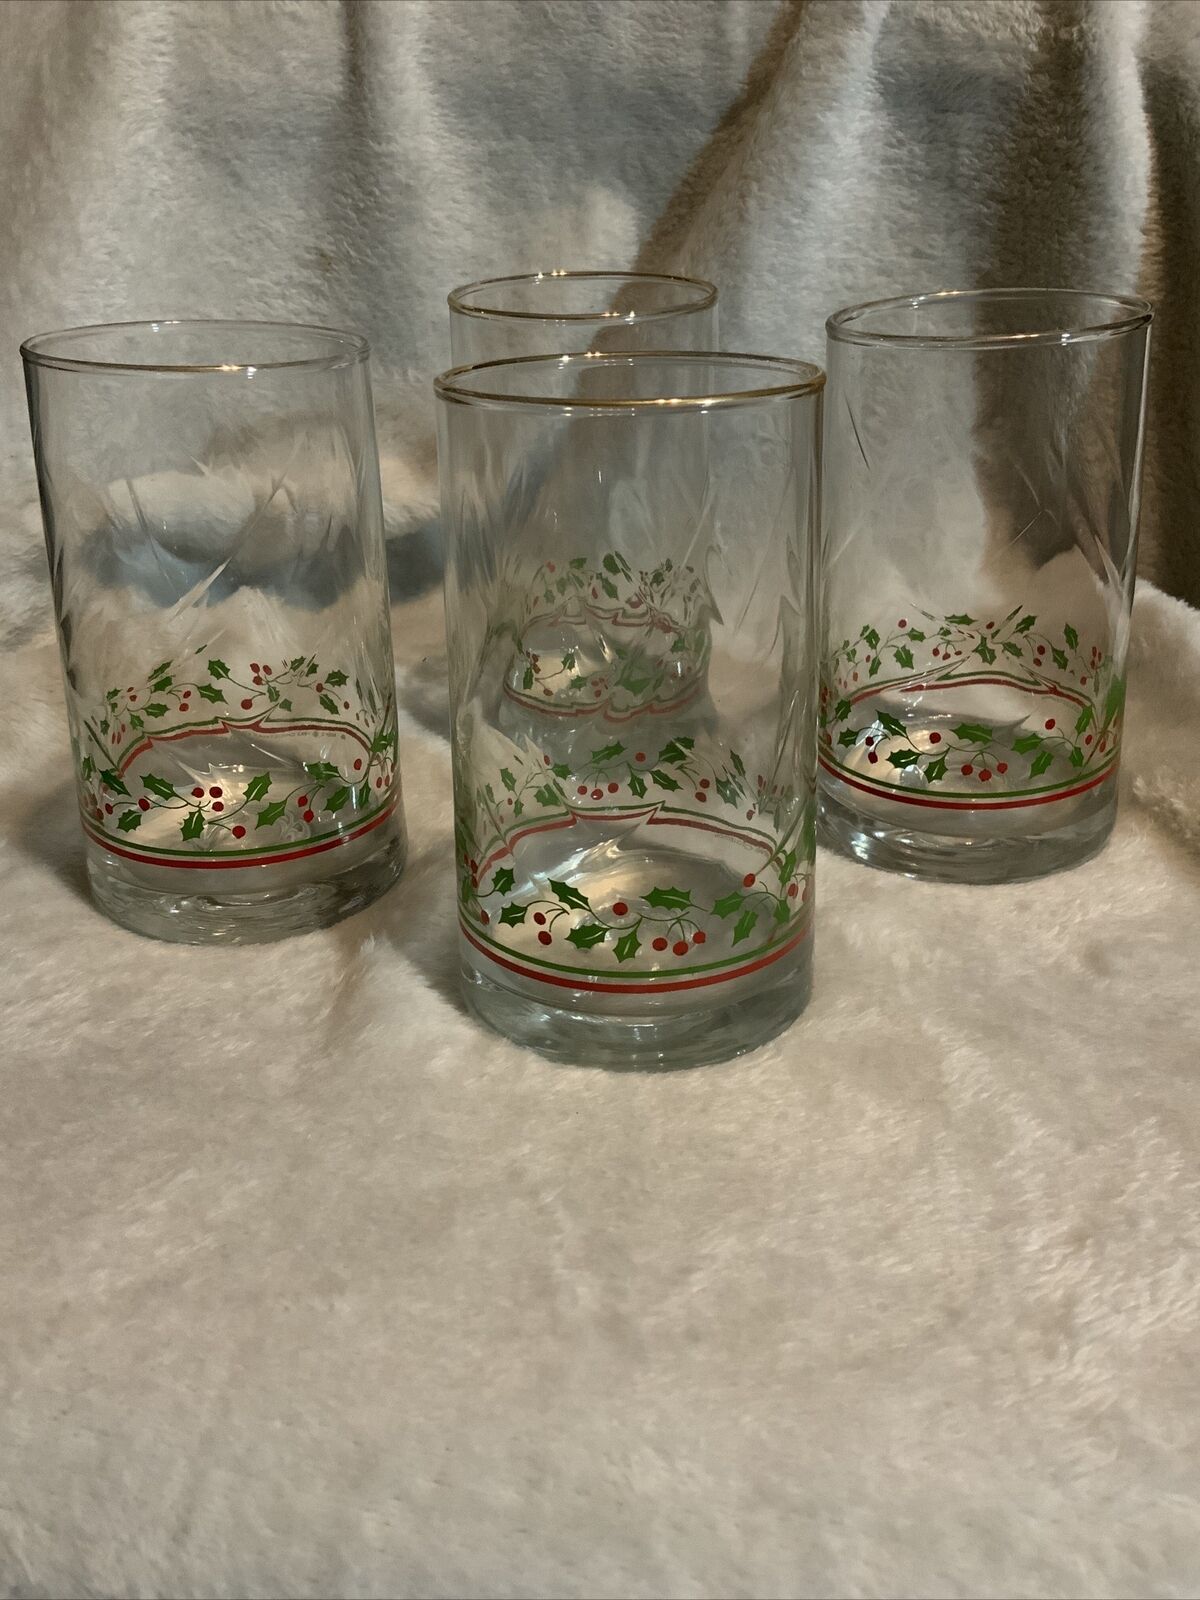 4 Vintage Arbys Christmas Glasses Tumblers Libbey Holly Berry 1984 5.25”